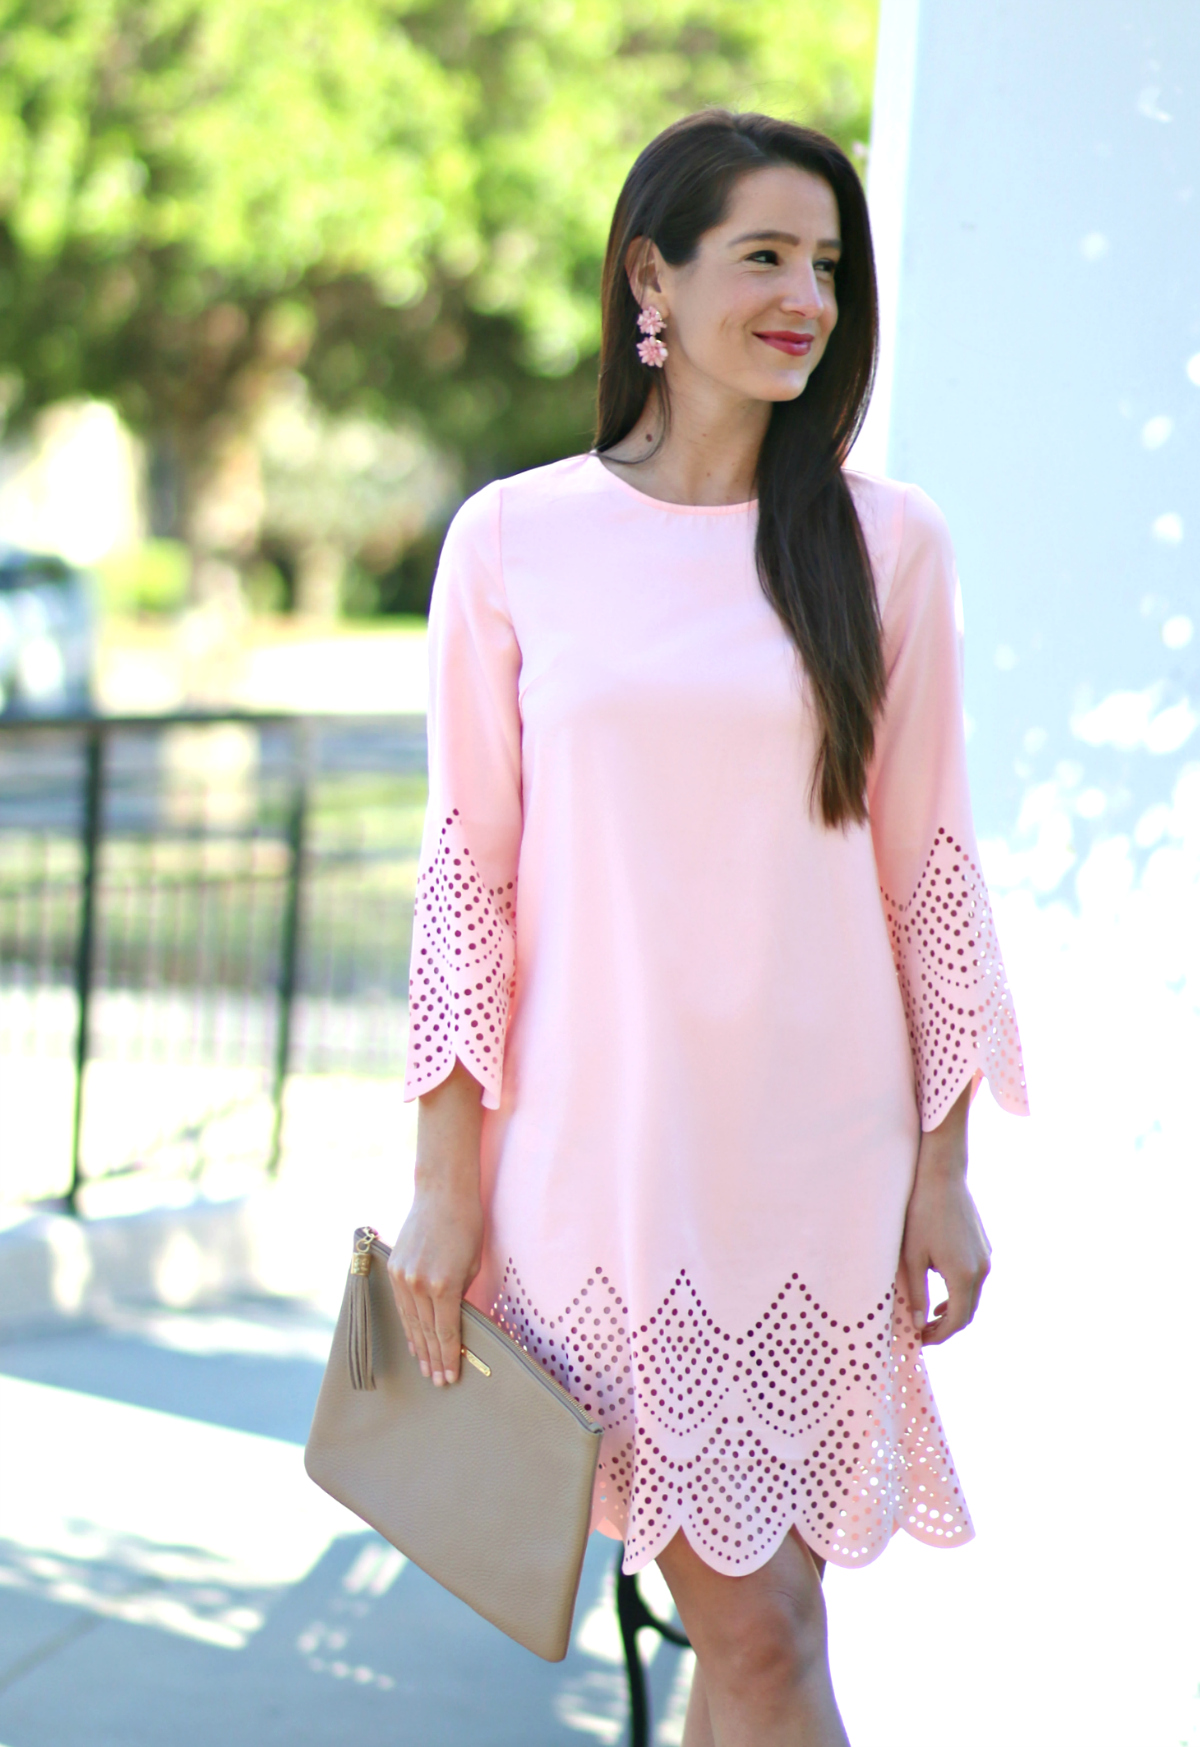 Best Dresses to Wear to a Spring Wedding by southern fashion blogger Stephanie Ziajka from Diary of a Debutante, spring wedding guest outfits, wedding guest dress ideas, dresses to wear to a spring wedding, pink scalloped hollow hem shift dress